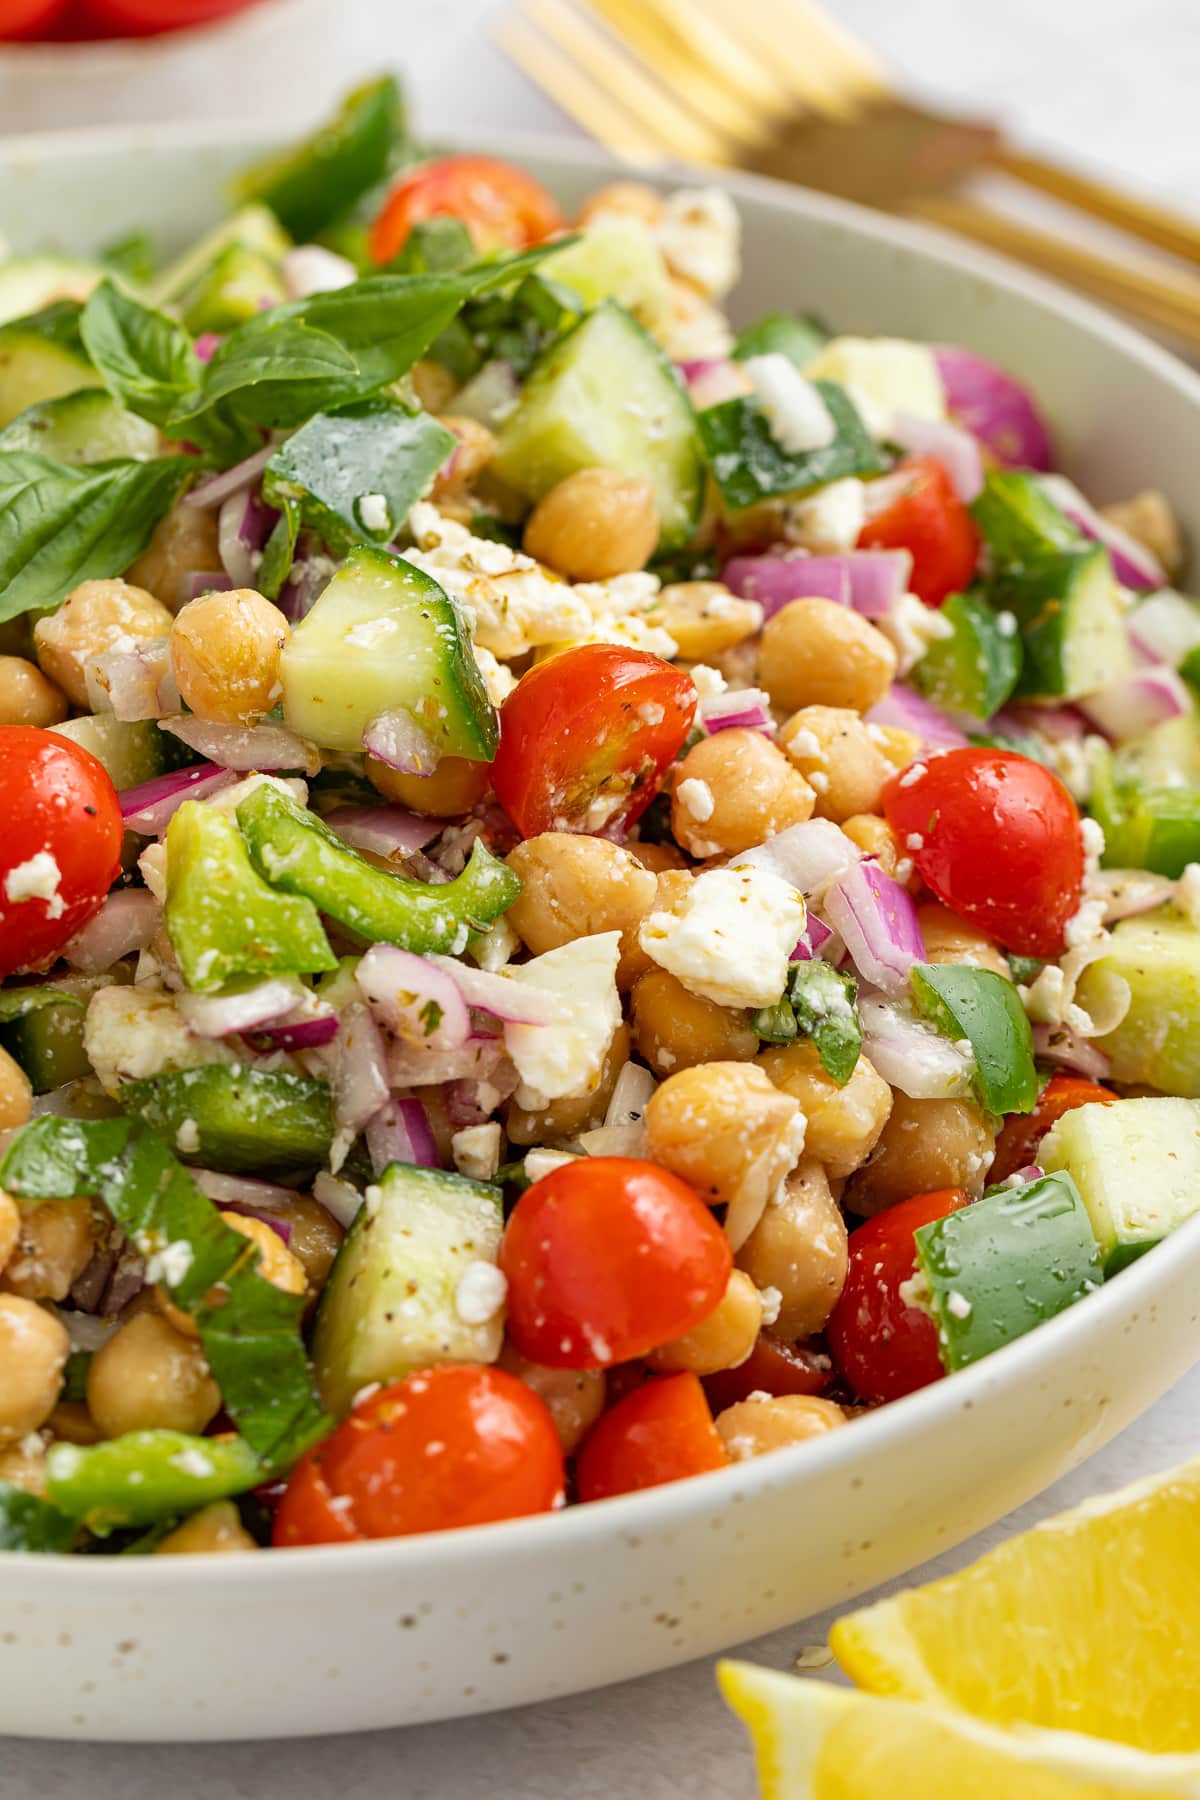 A large white bowl holding a Mediterranean-style chickpea salad with feta, bright red cherry tomatoes, chickpeas, cucumber, onion, and bell pepper.